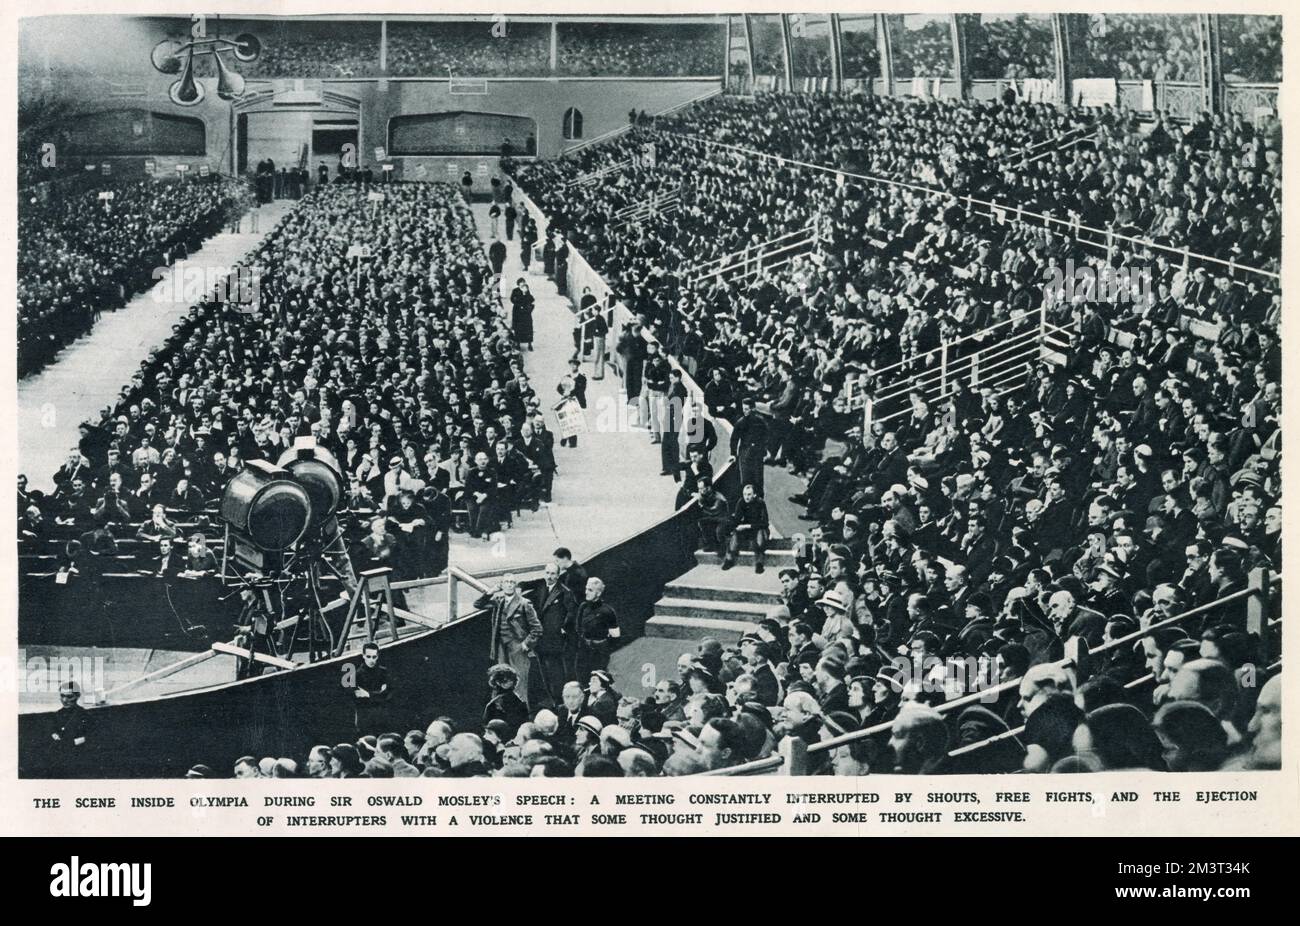 An audience of 15,000 at Olympia, 7 June 1934, for a meeting of the British Union of Fascists in which Sir Oswald Mosley, the only speaker, gave a speech lasting two and a quarter hours during which time there were numerous outbreaks of violence between Blackshirts and those opposing them. Stock Photo